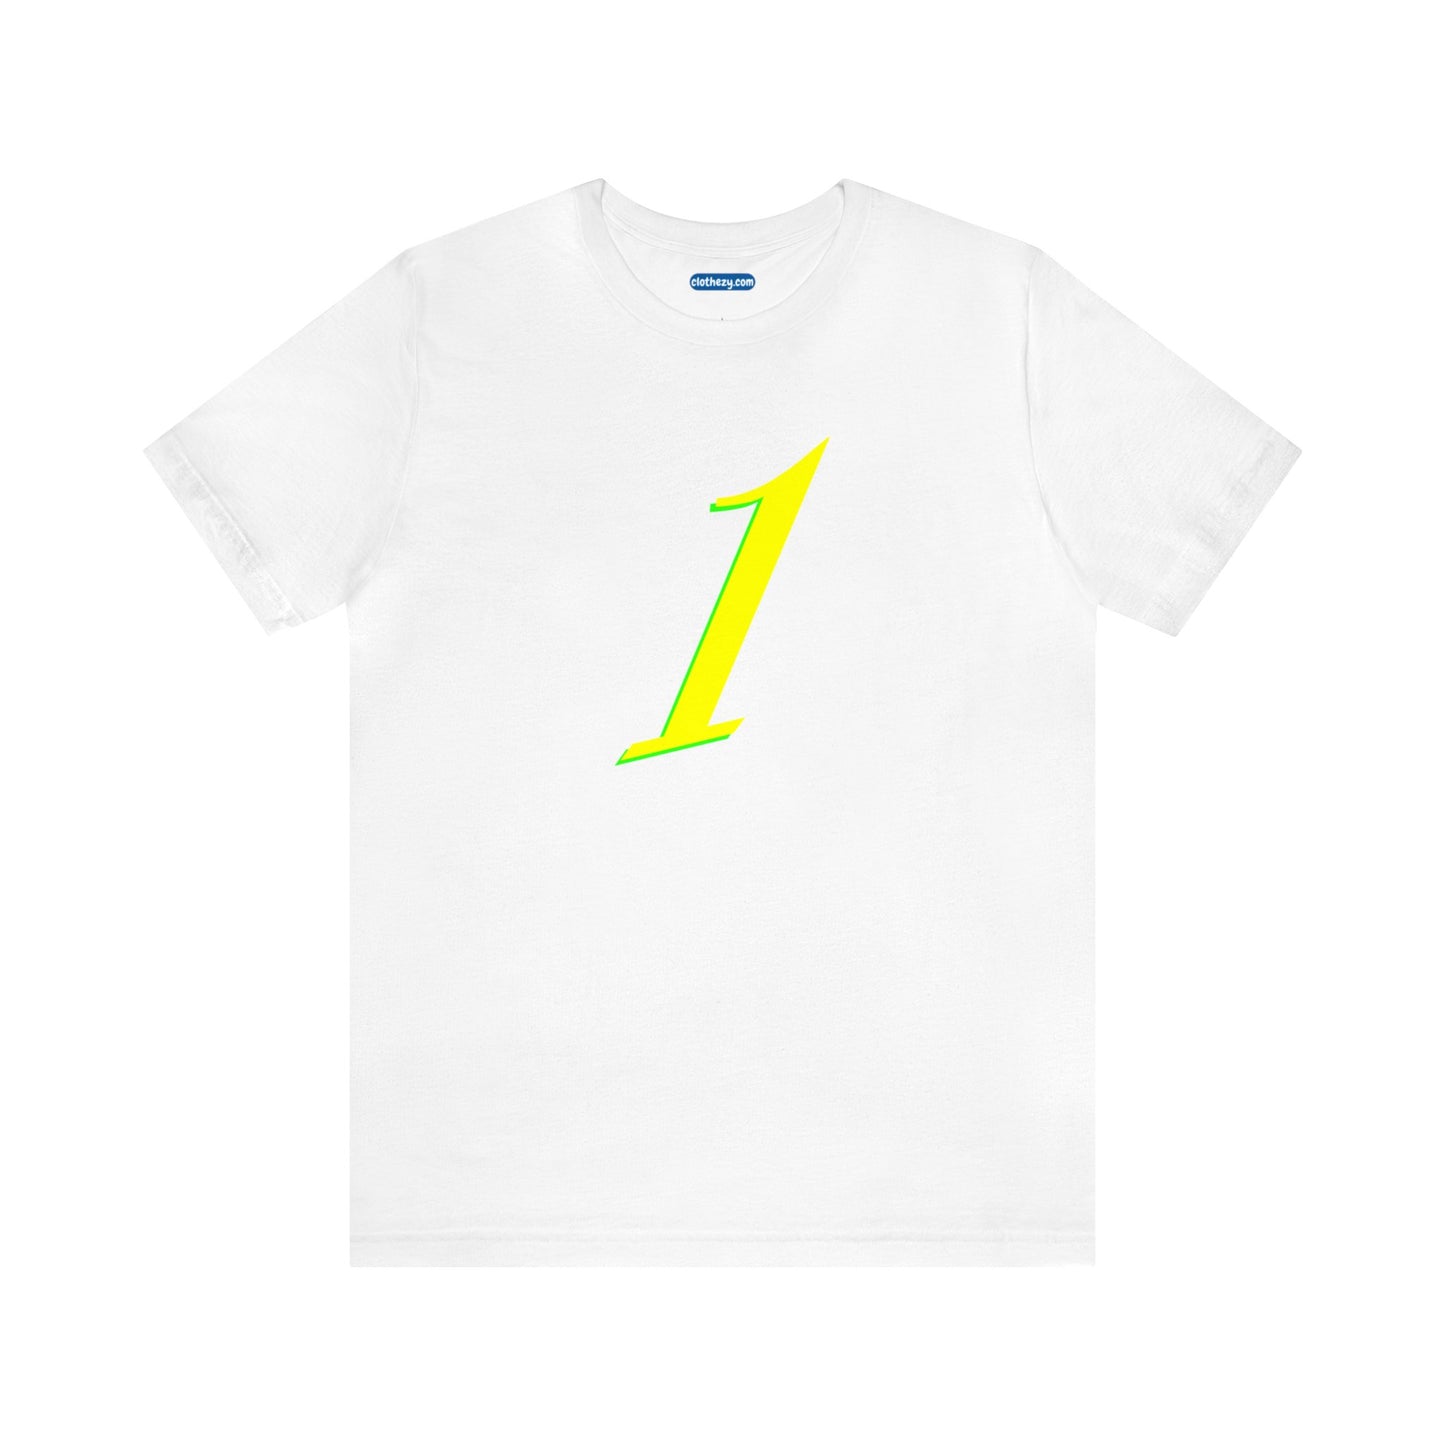 Number 1 Design - Soft Cotton Tee for birthdays and celebrations, Gift for friends and family, Multiple Options by clothezy.com in White Size Small - Buy Now